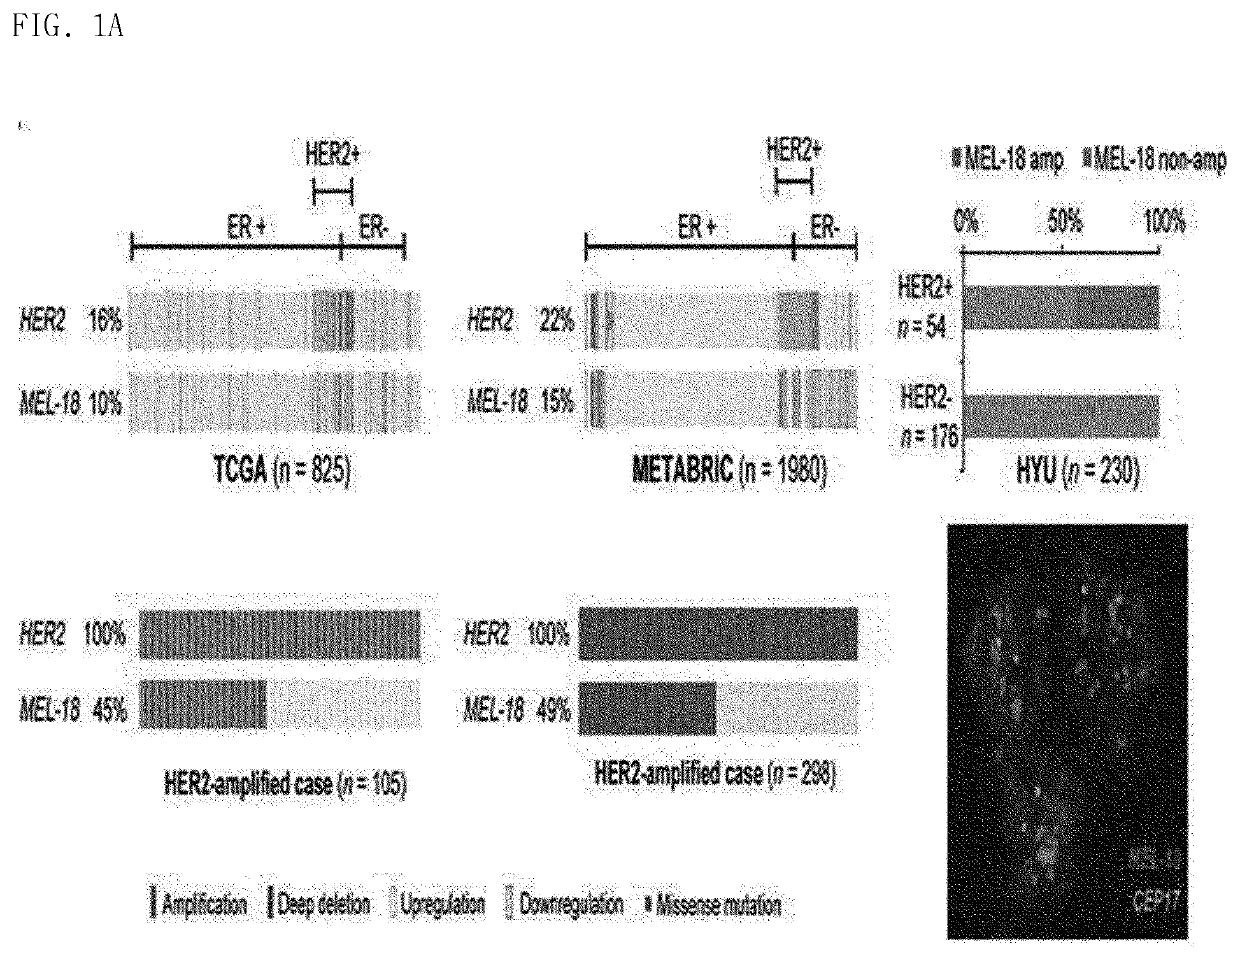 Biomarker for her2-positive cancer and Anti-her2 therapy and applications thereof